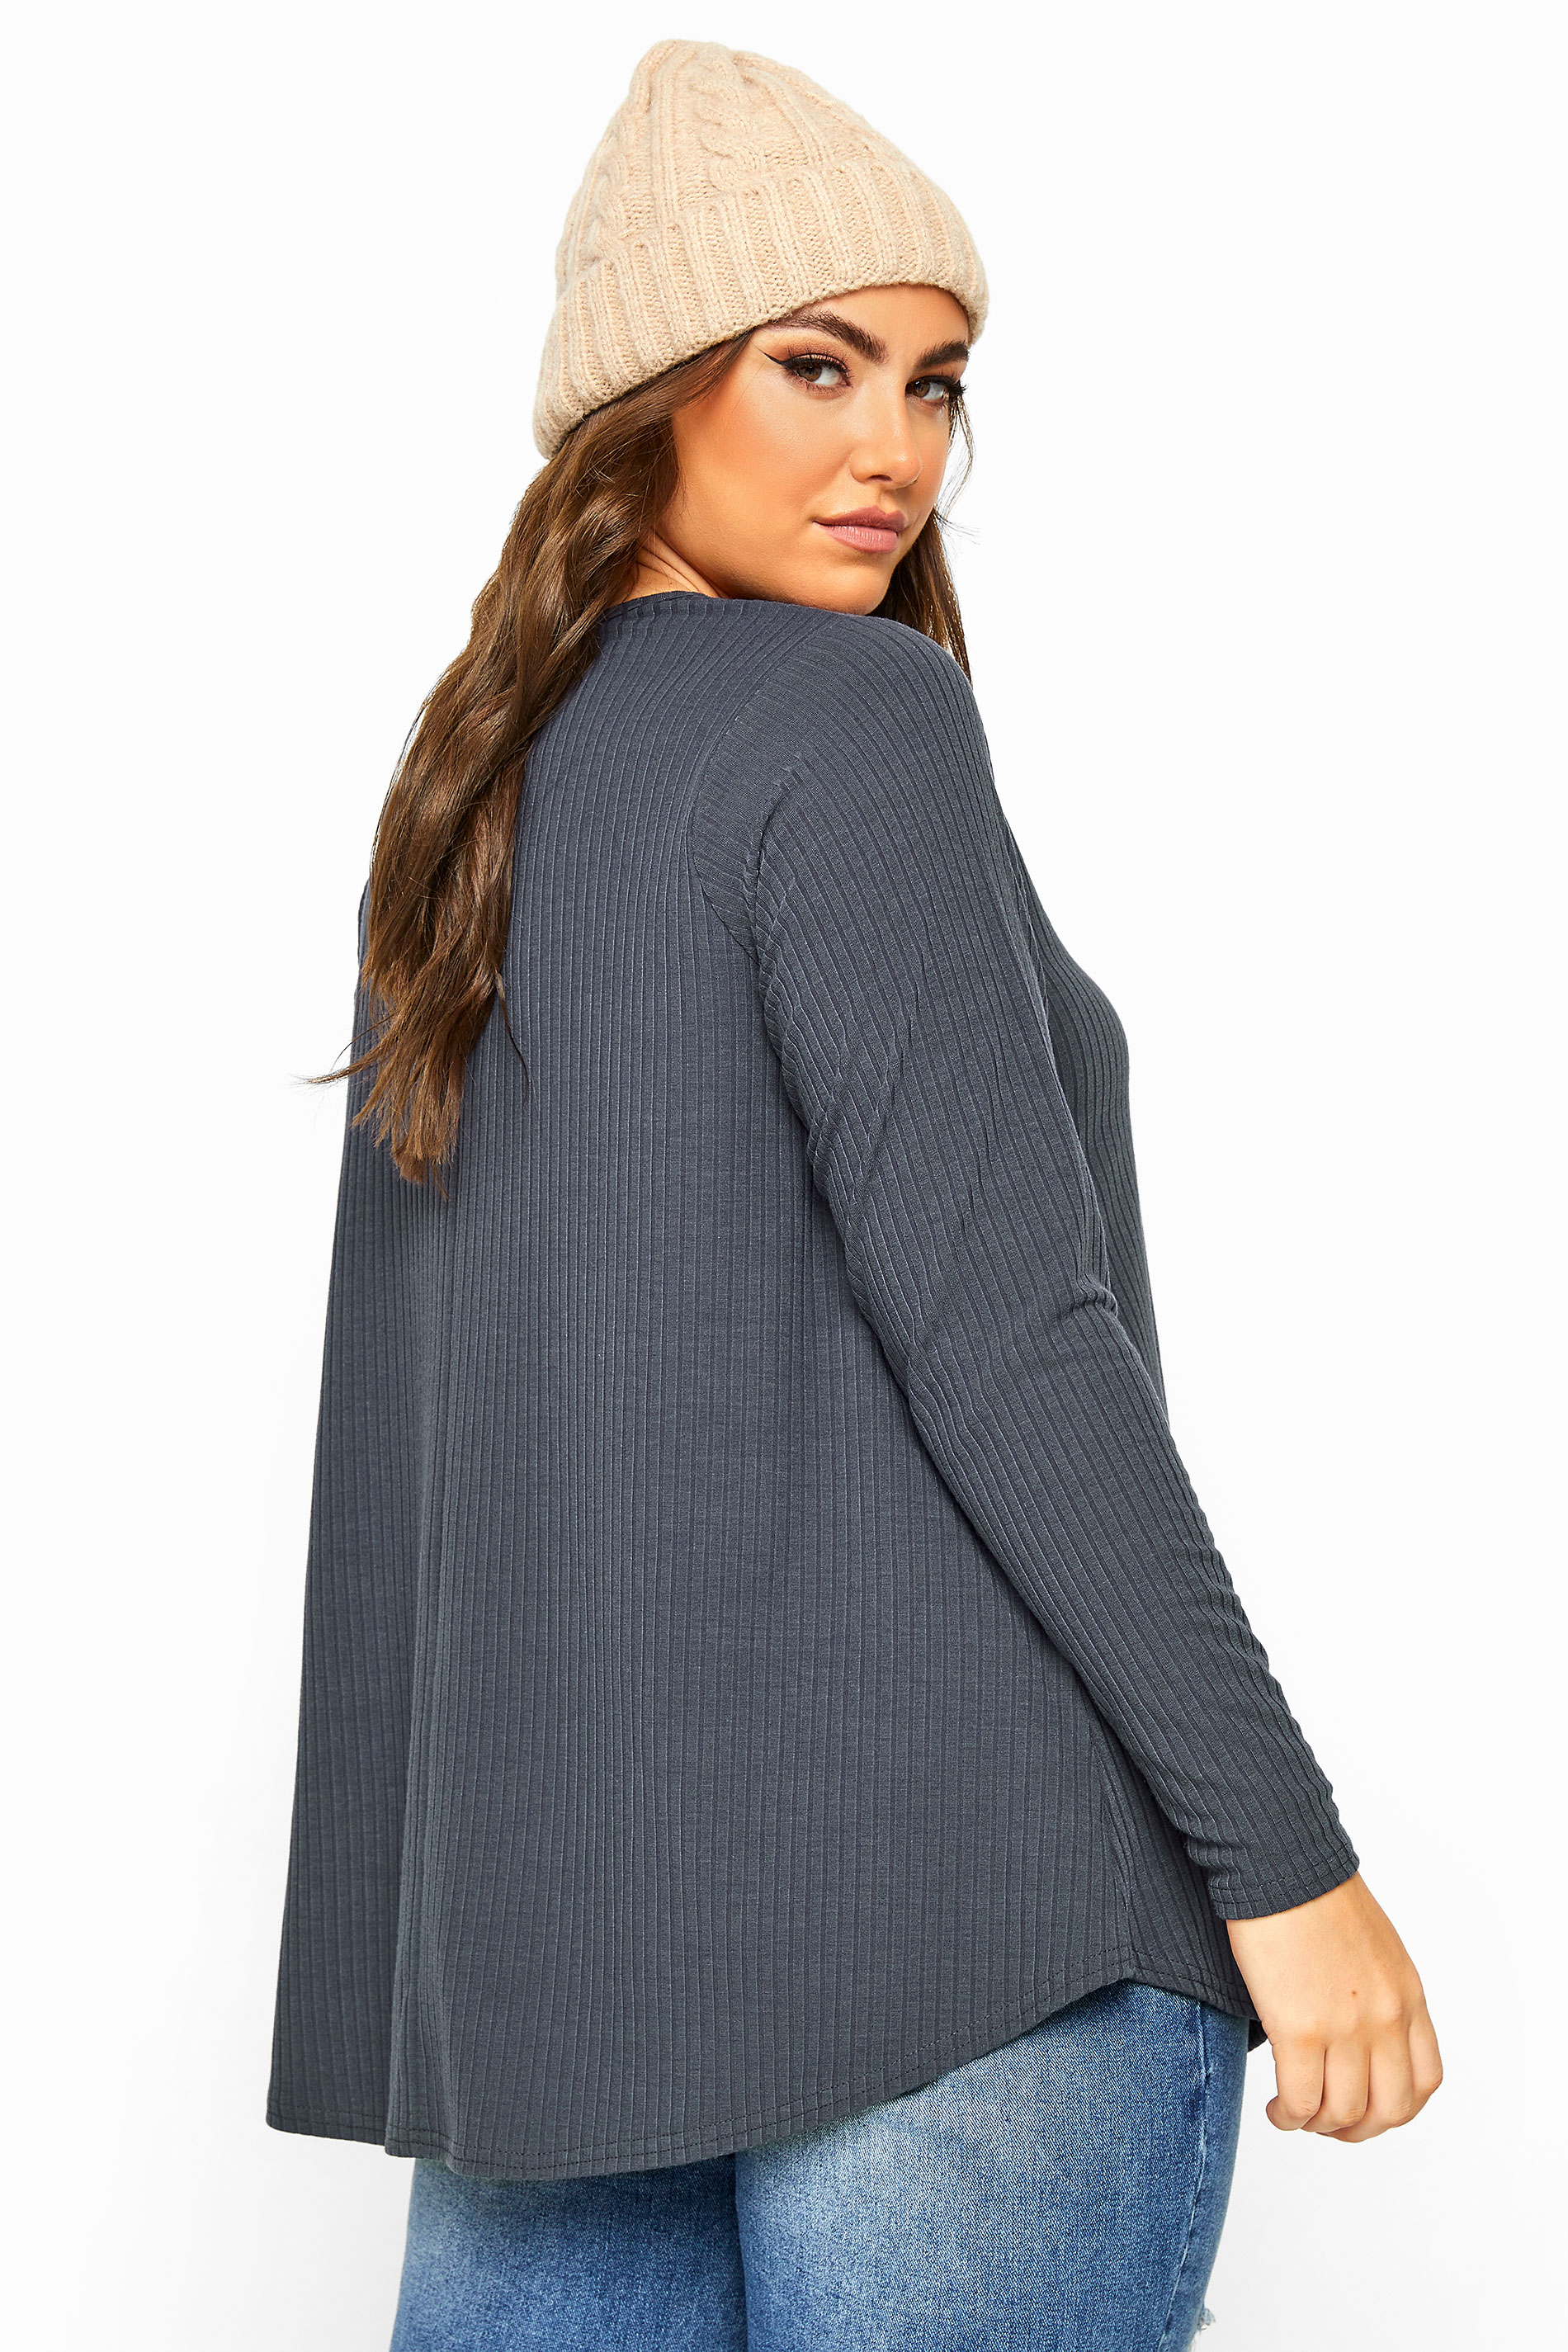 Grande taille  Tops Grande taille  Tops à Manches Longues | LIMITED COLLECTION - Top Gris en Jersey Style Nervuré - FD16590